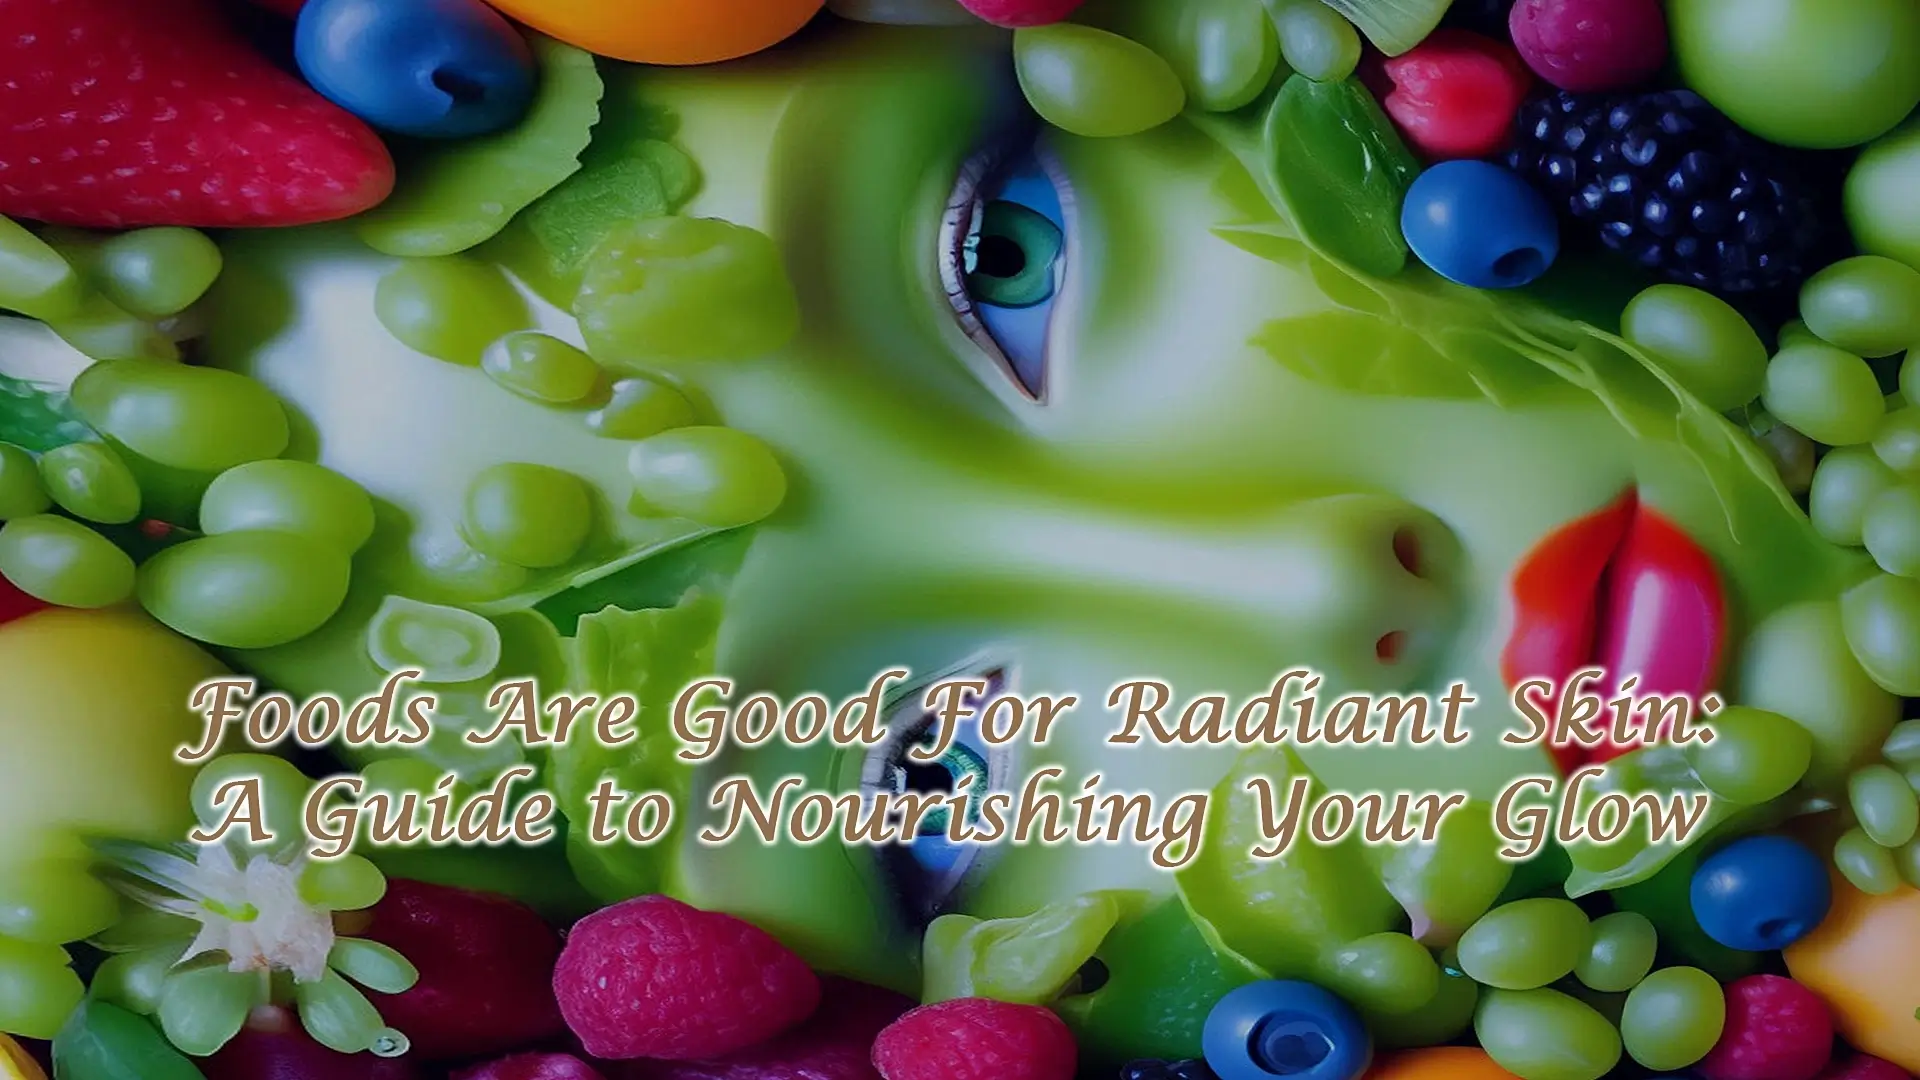 Foods for Radiant Skin: A Guide to Nourishing Your Glow